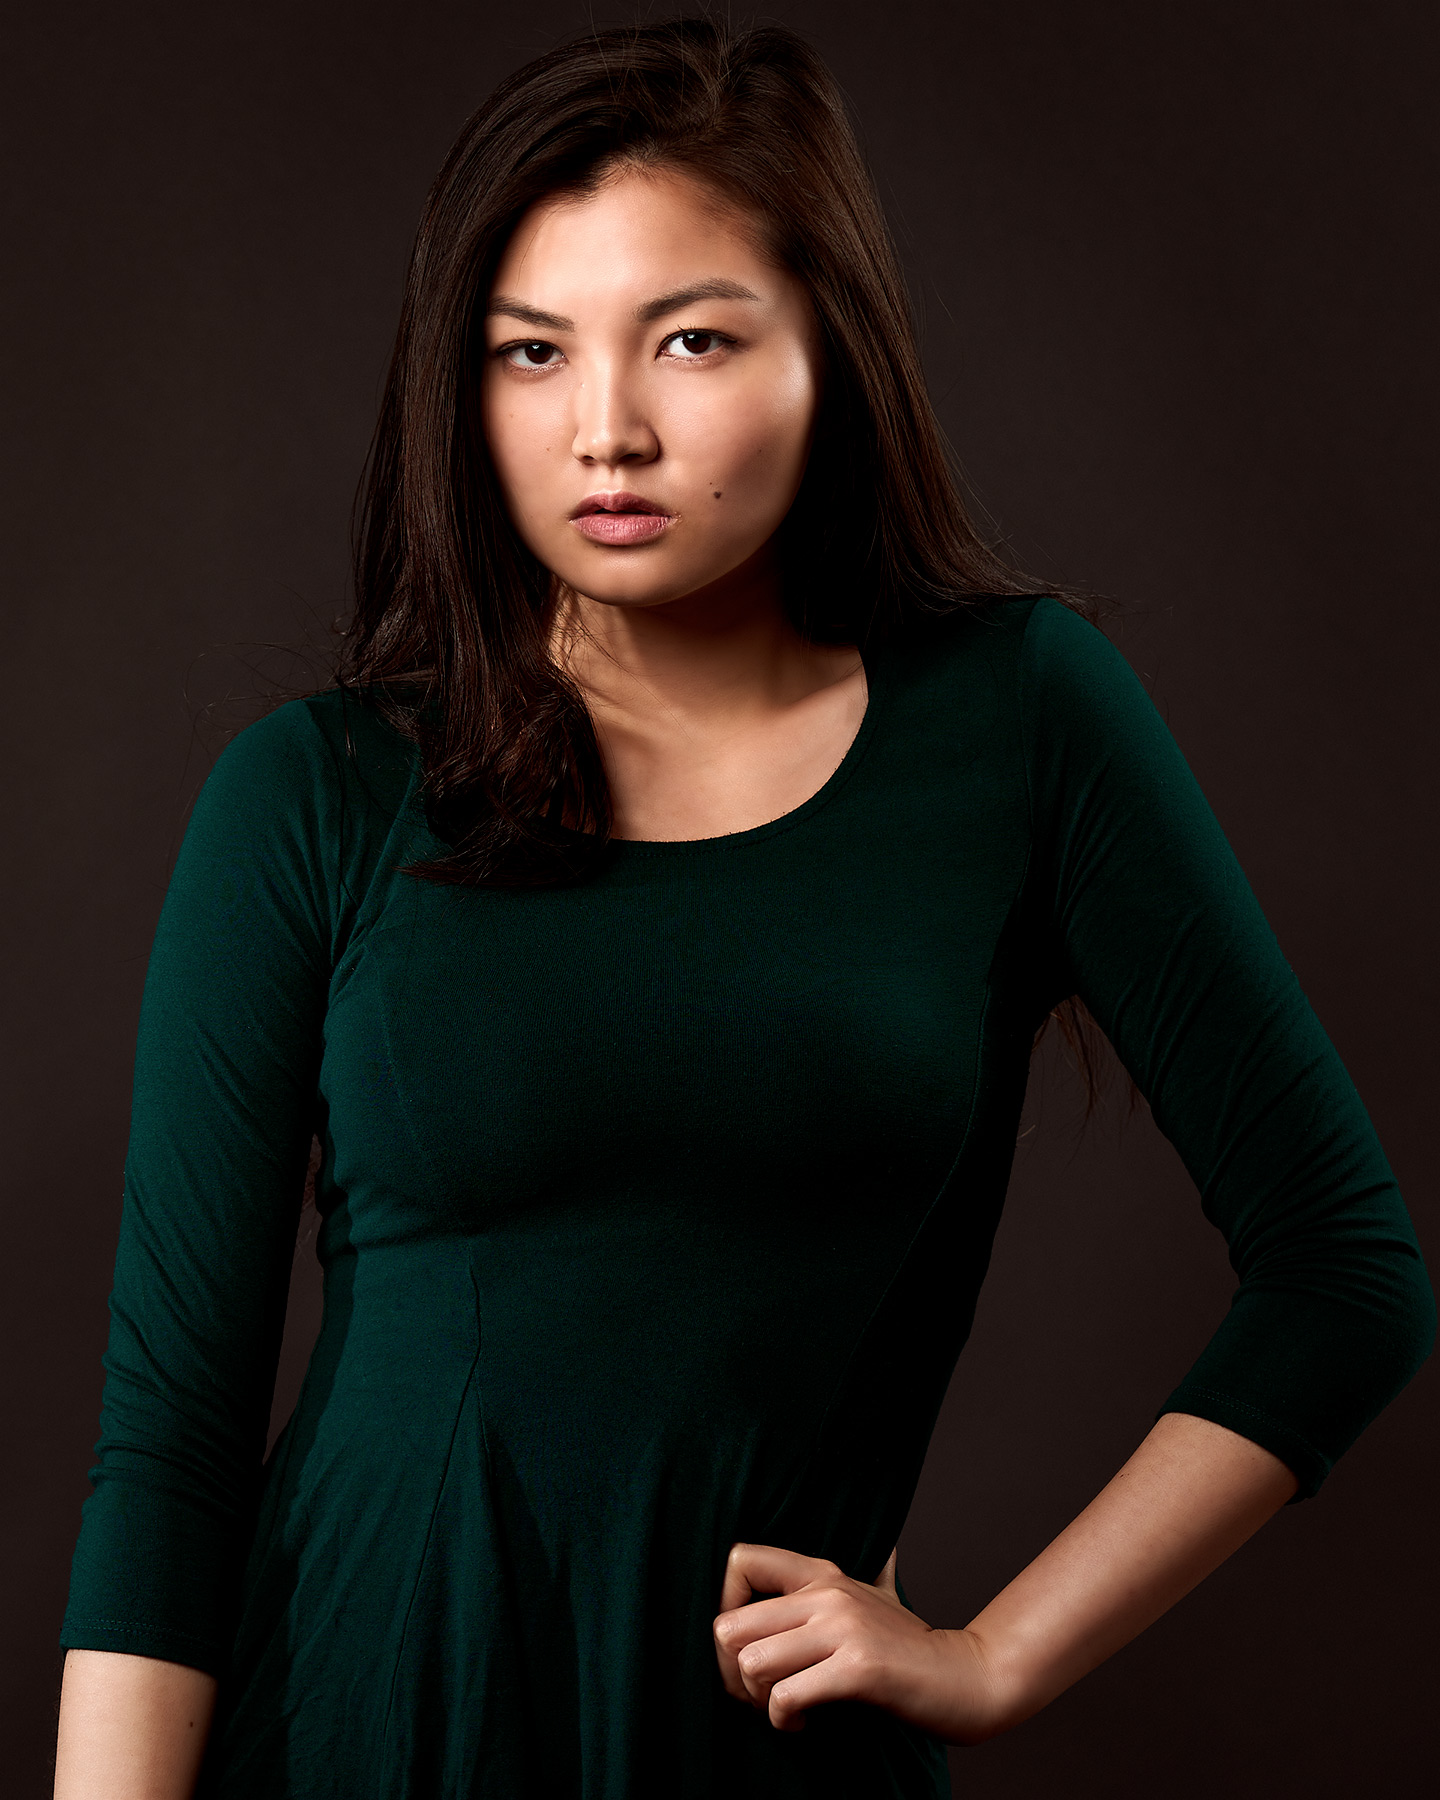 A woman posing against a dark background for modeling portfolio shots in Los Angeles